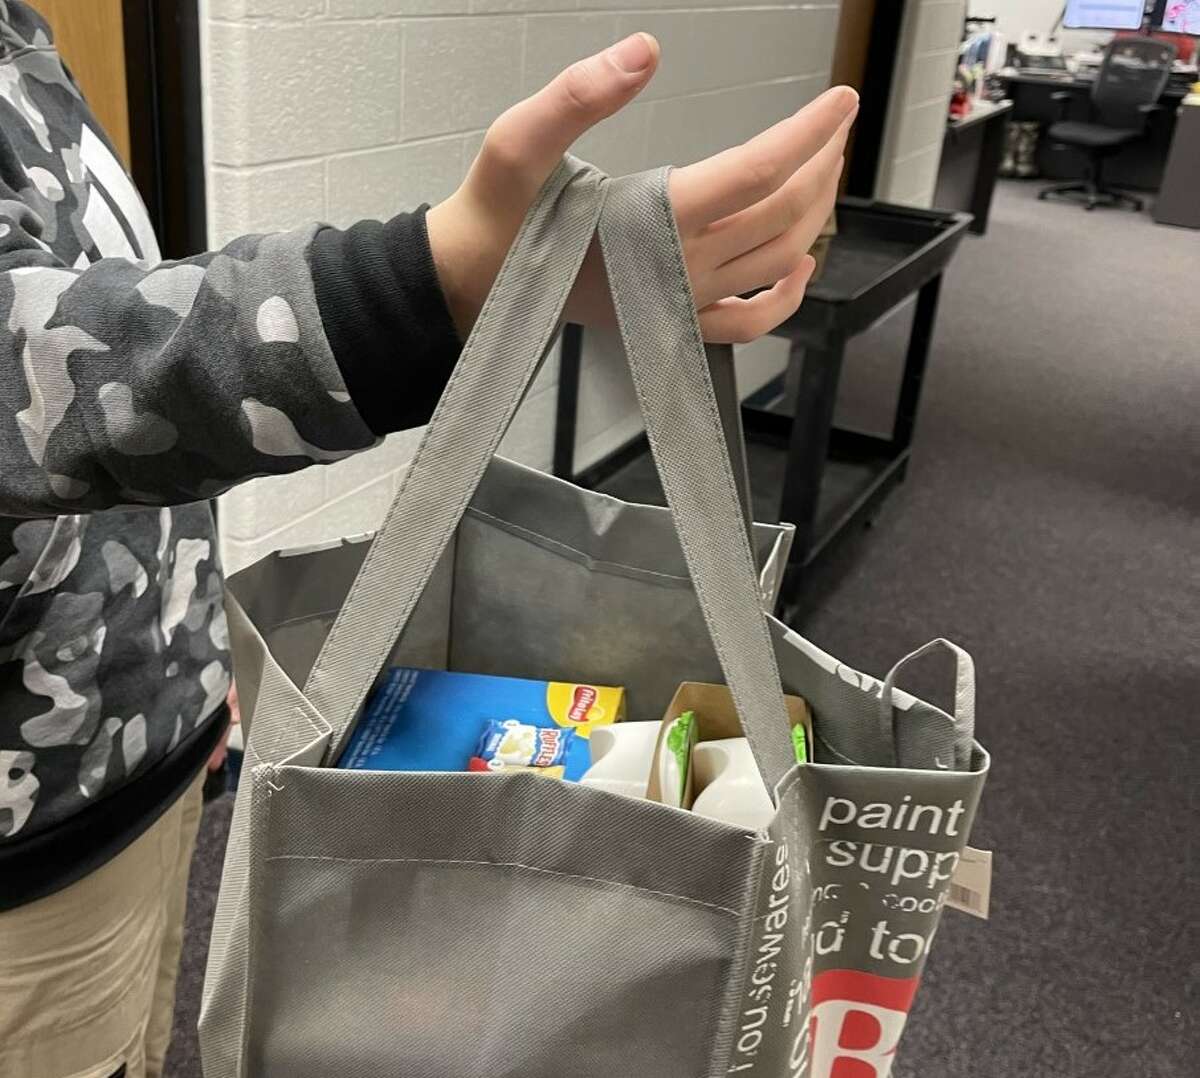 Students at Benzie Central High School can take home a bag of food from the new food pantry to get them through the week.